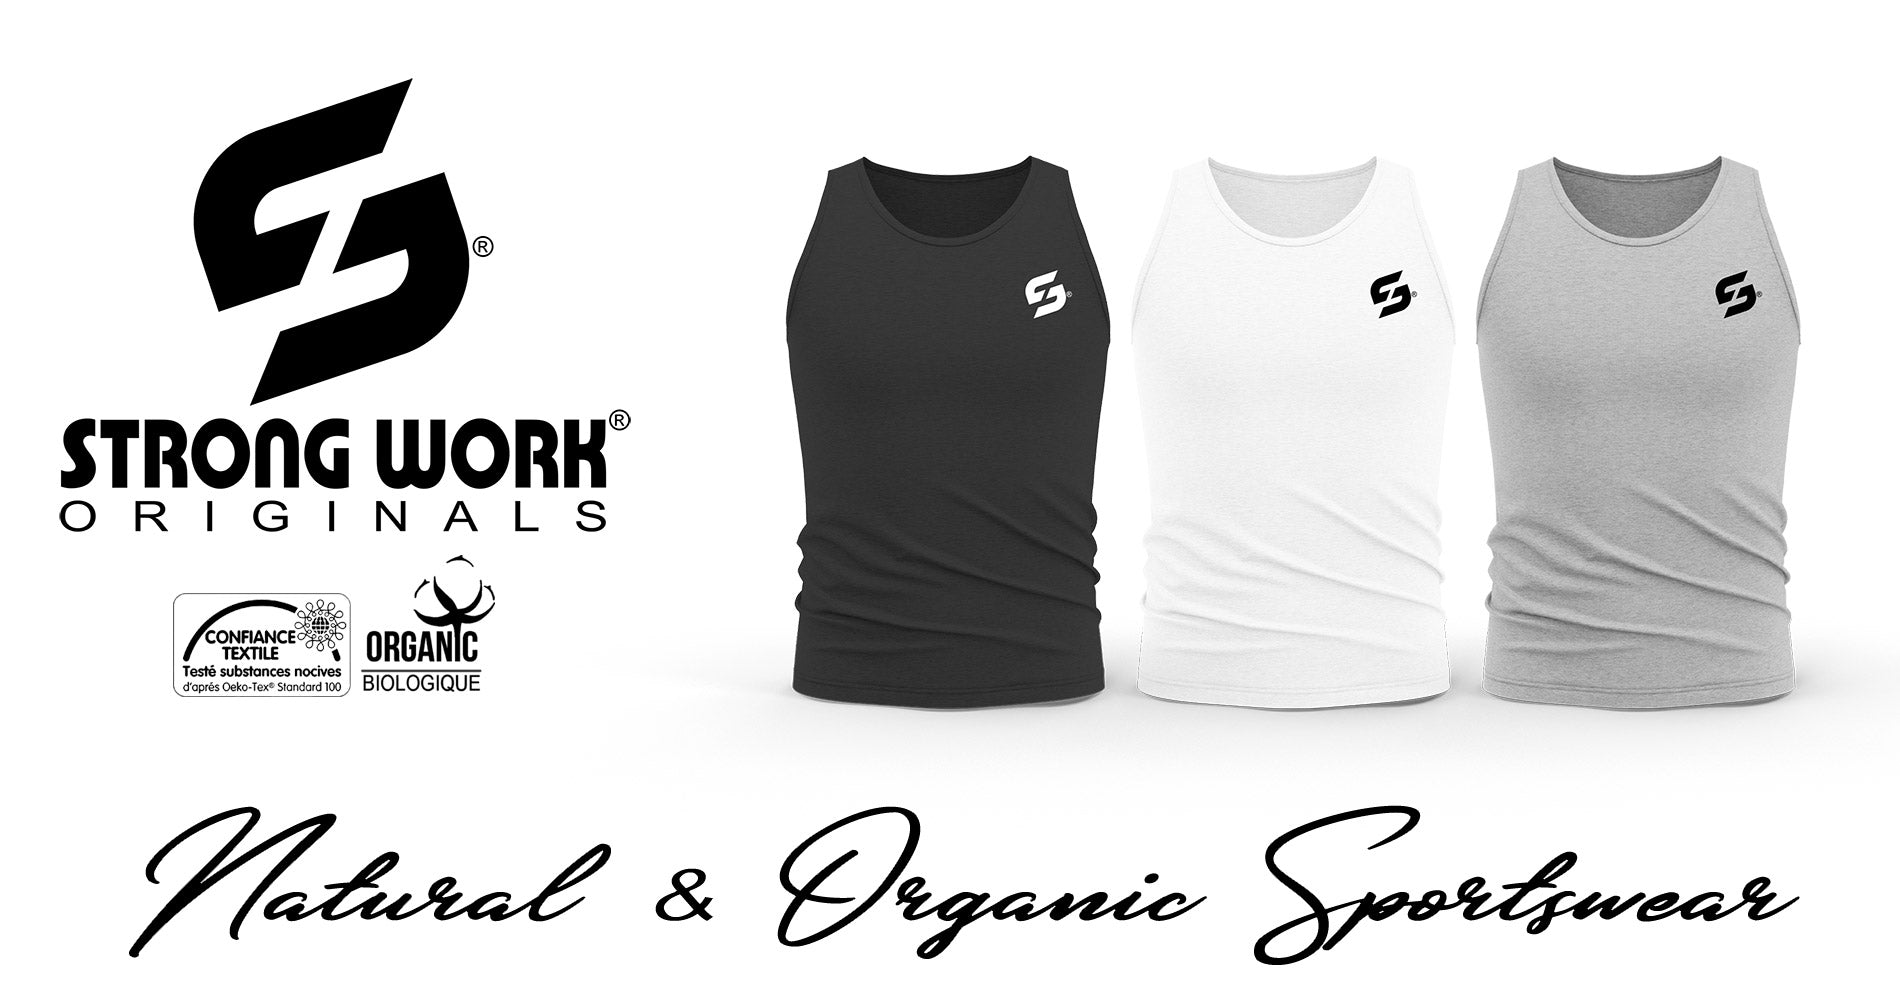 STRONG WORK NEW CLASSIC ORGANIC COTTON TANK TOP FOR WOMEN